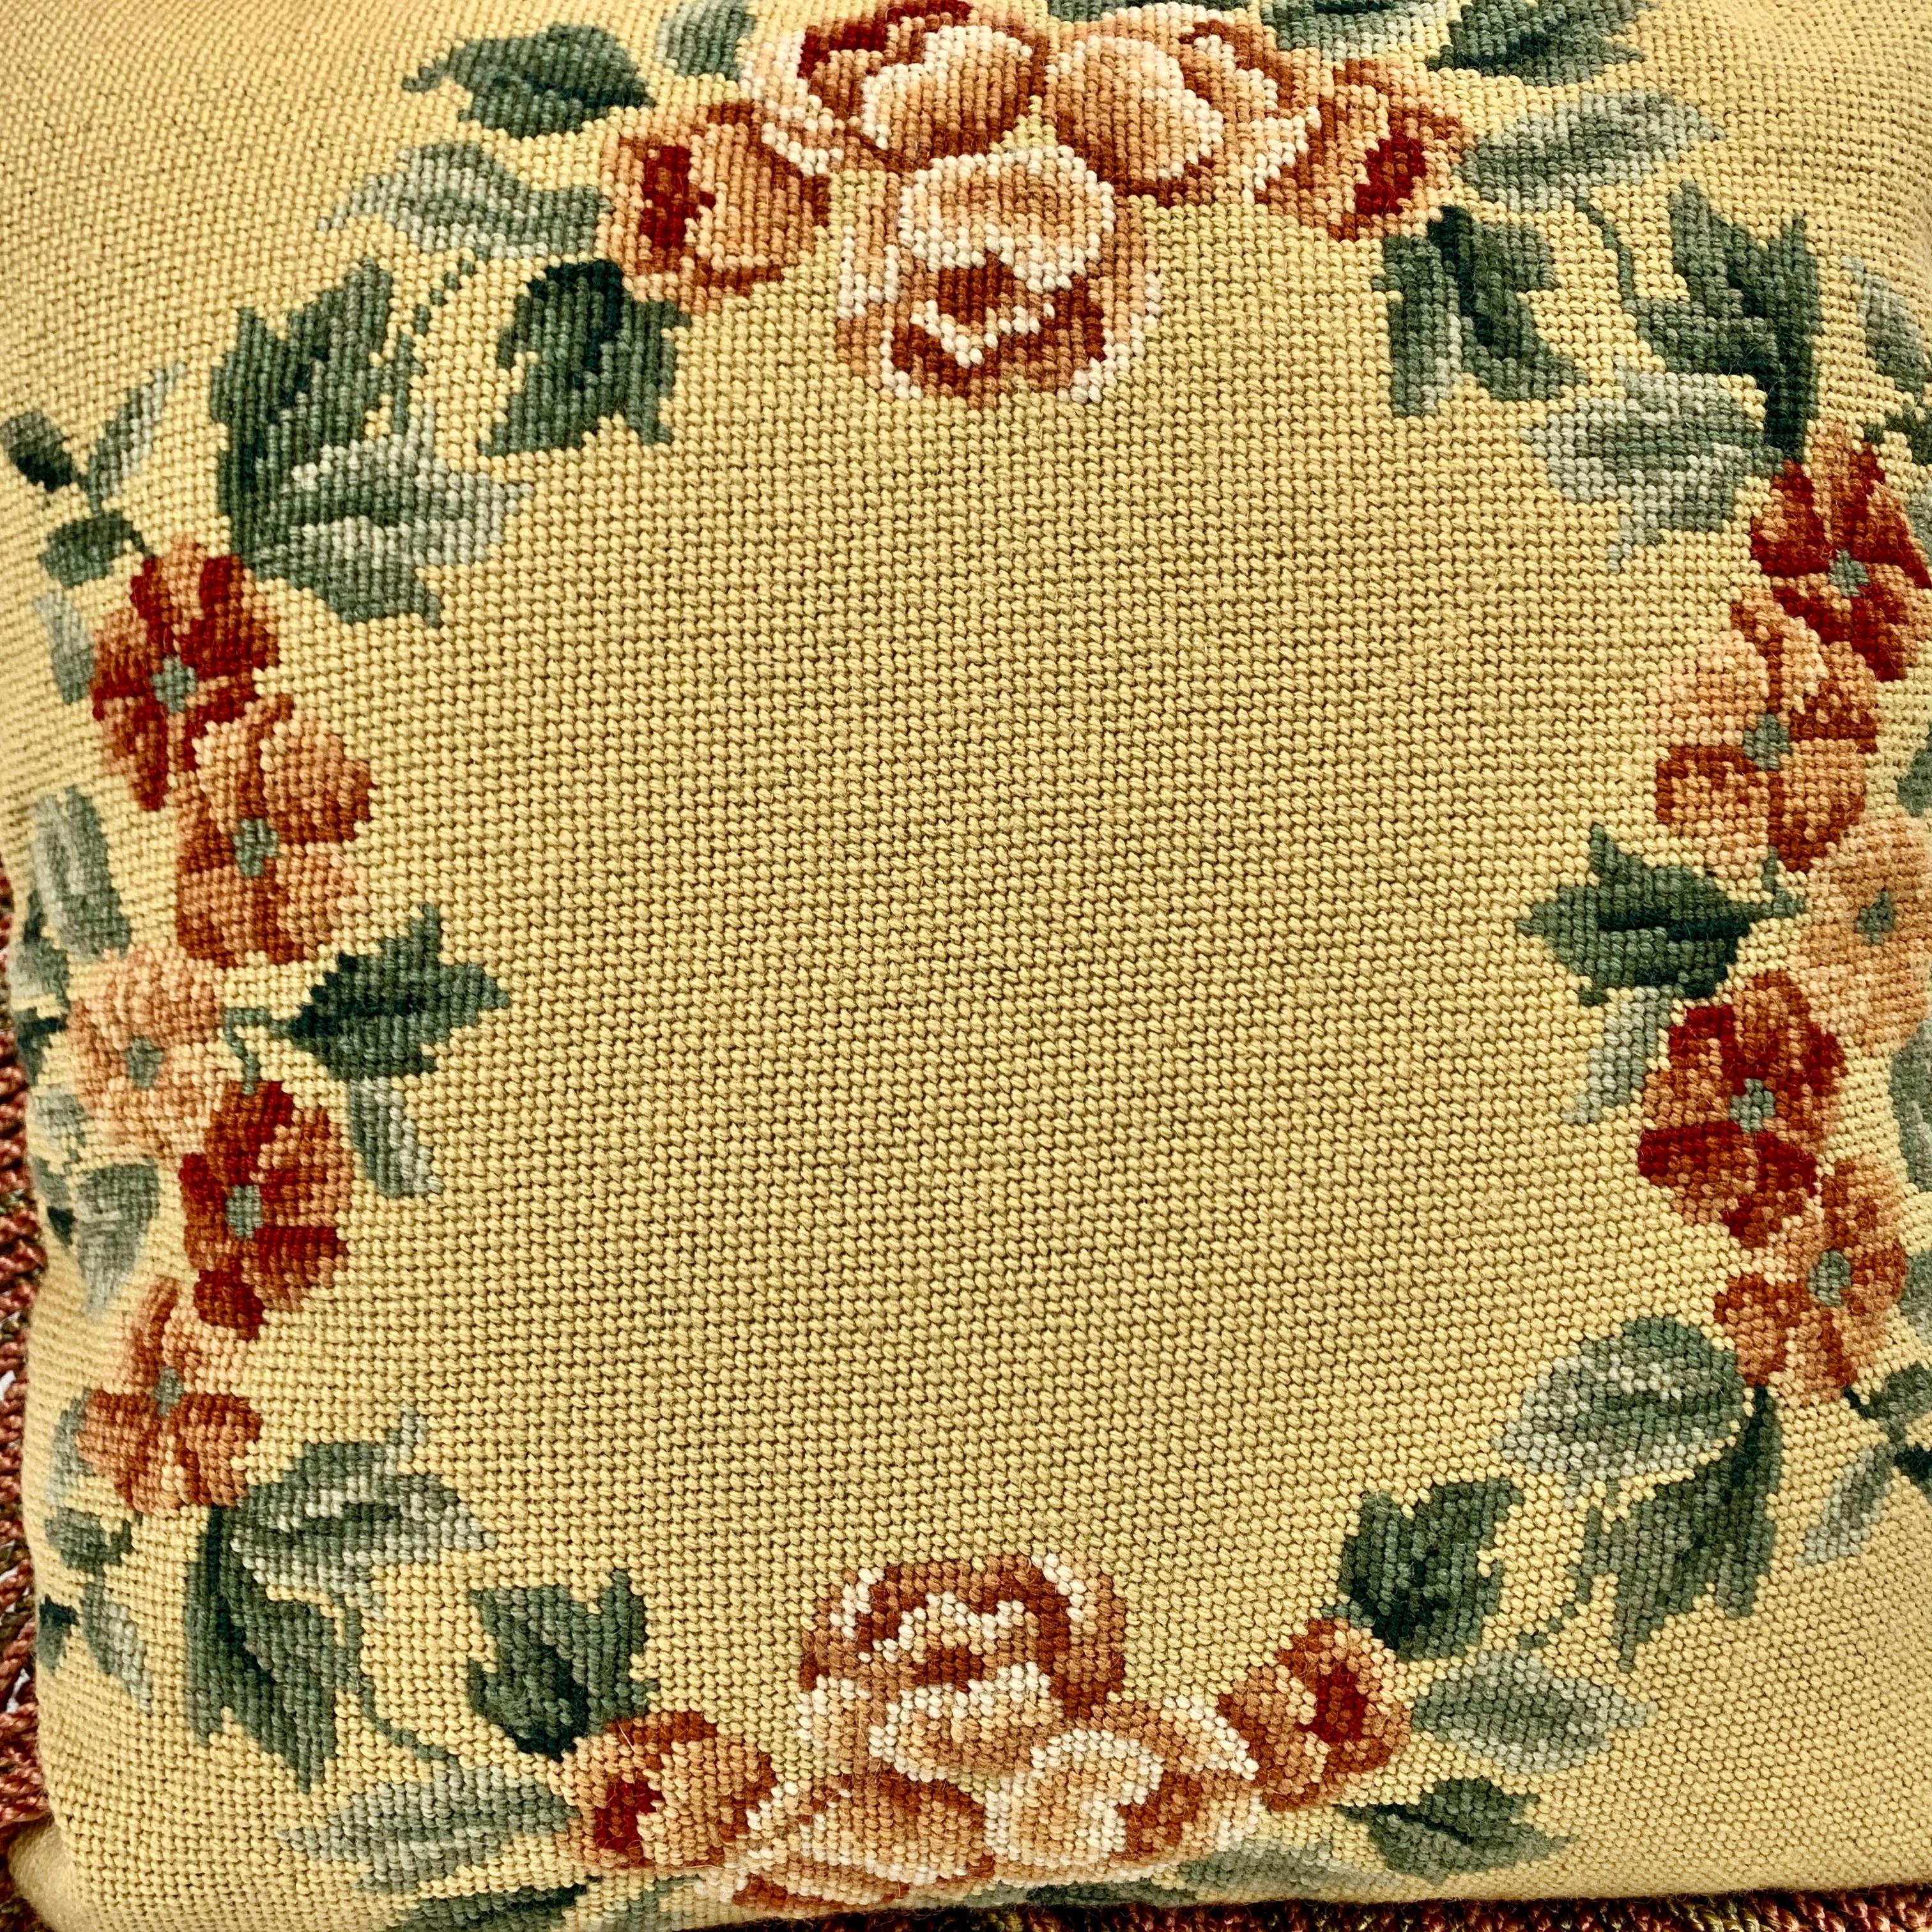 Vintage hand needlepointed cushion or decorative pillow. The design is a garland of tomato red flowers and green leaves on a golden wheat ground. The trim is fringe and the newly added backing is damask. 
Feather and down insert.
There is a blind